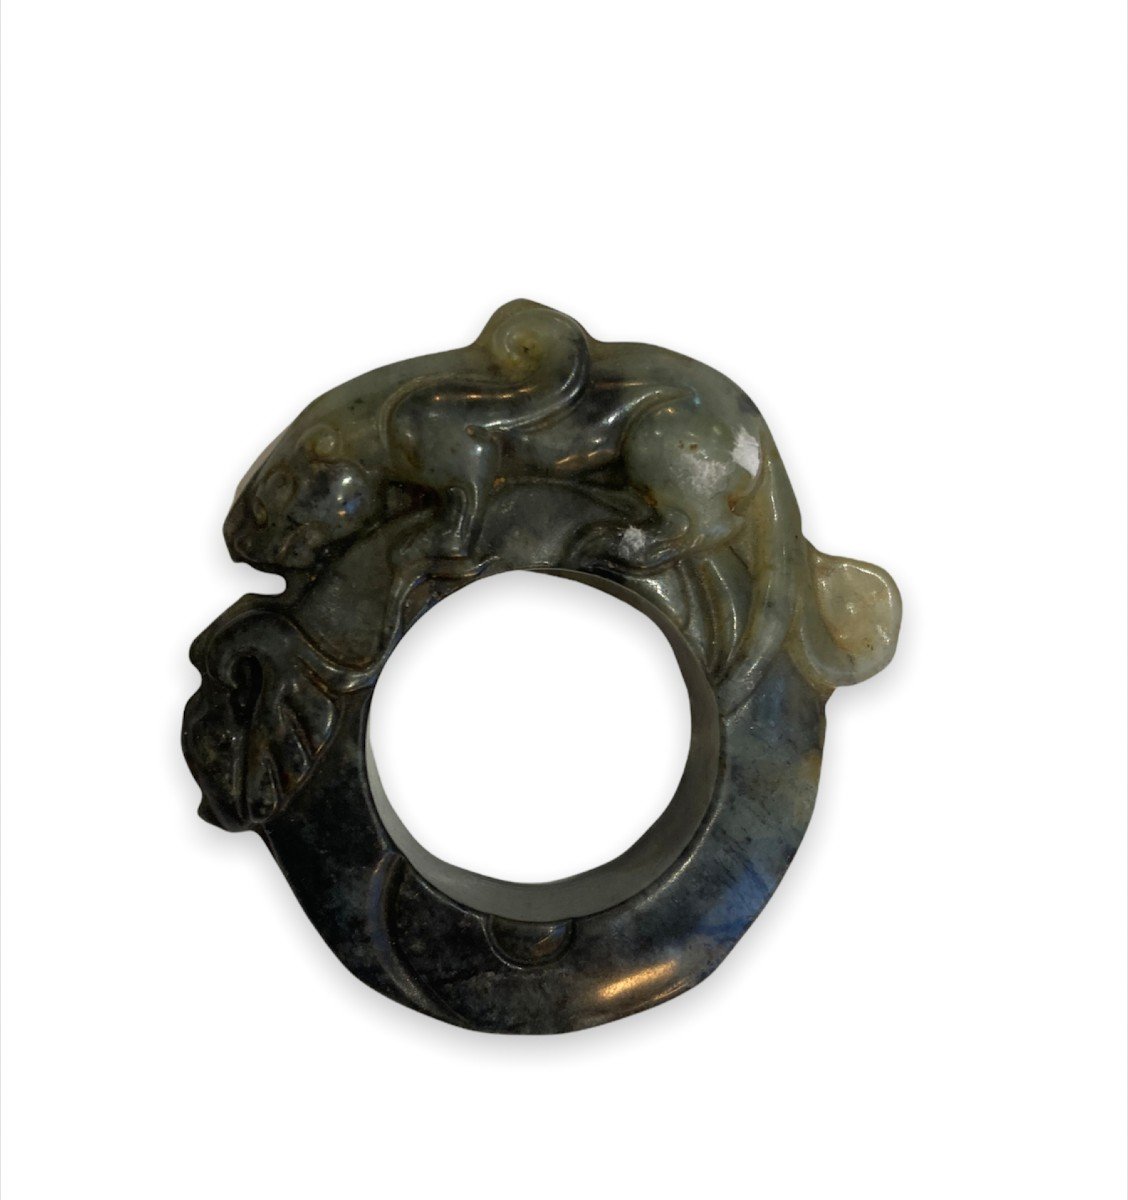 Green Nephrite Jade Ring With Dragon Pattern - China Early 20th Century